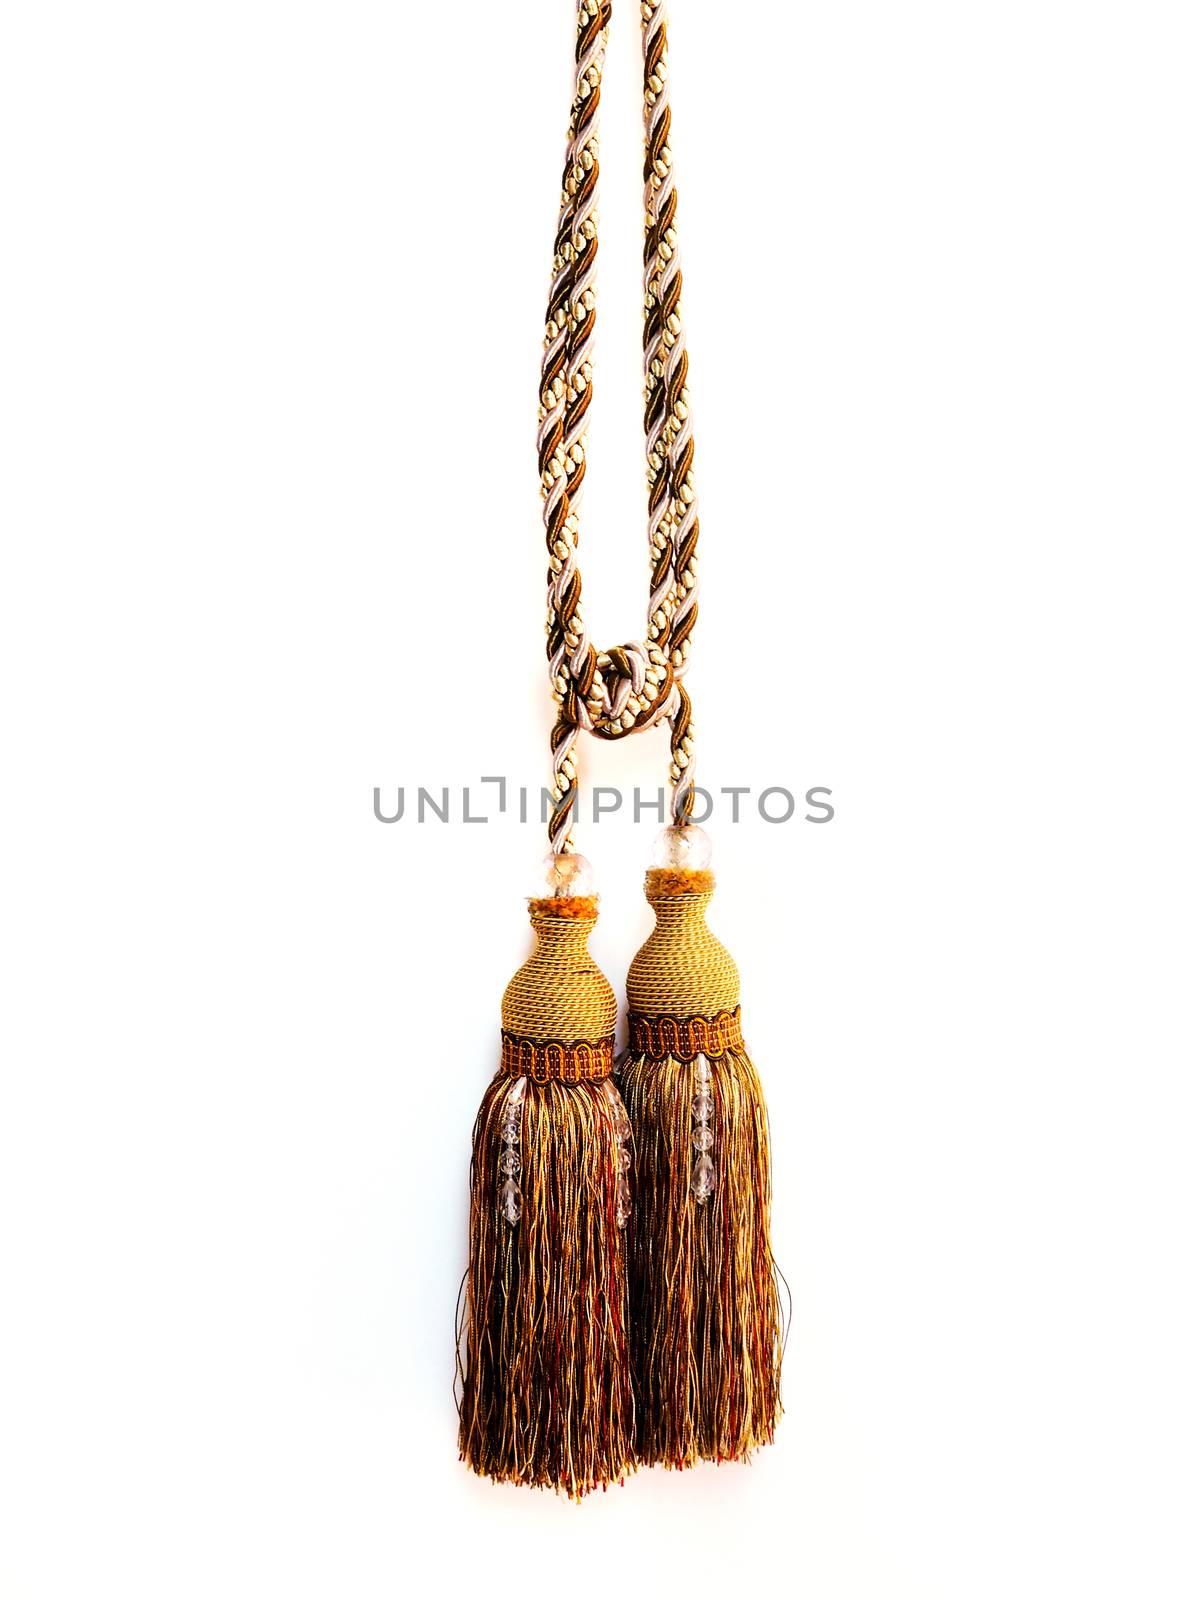 Luxury tassels for beautiful curtain ropes. Isolated on white background.